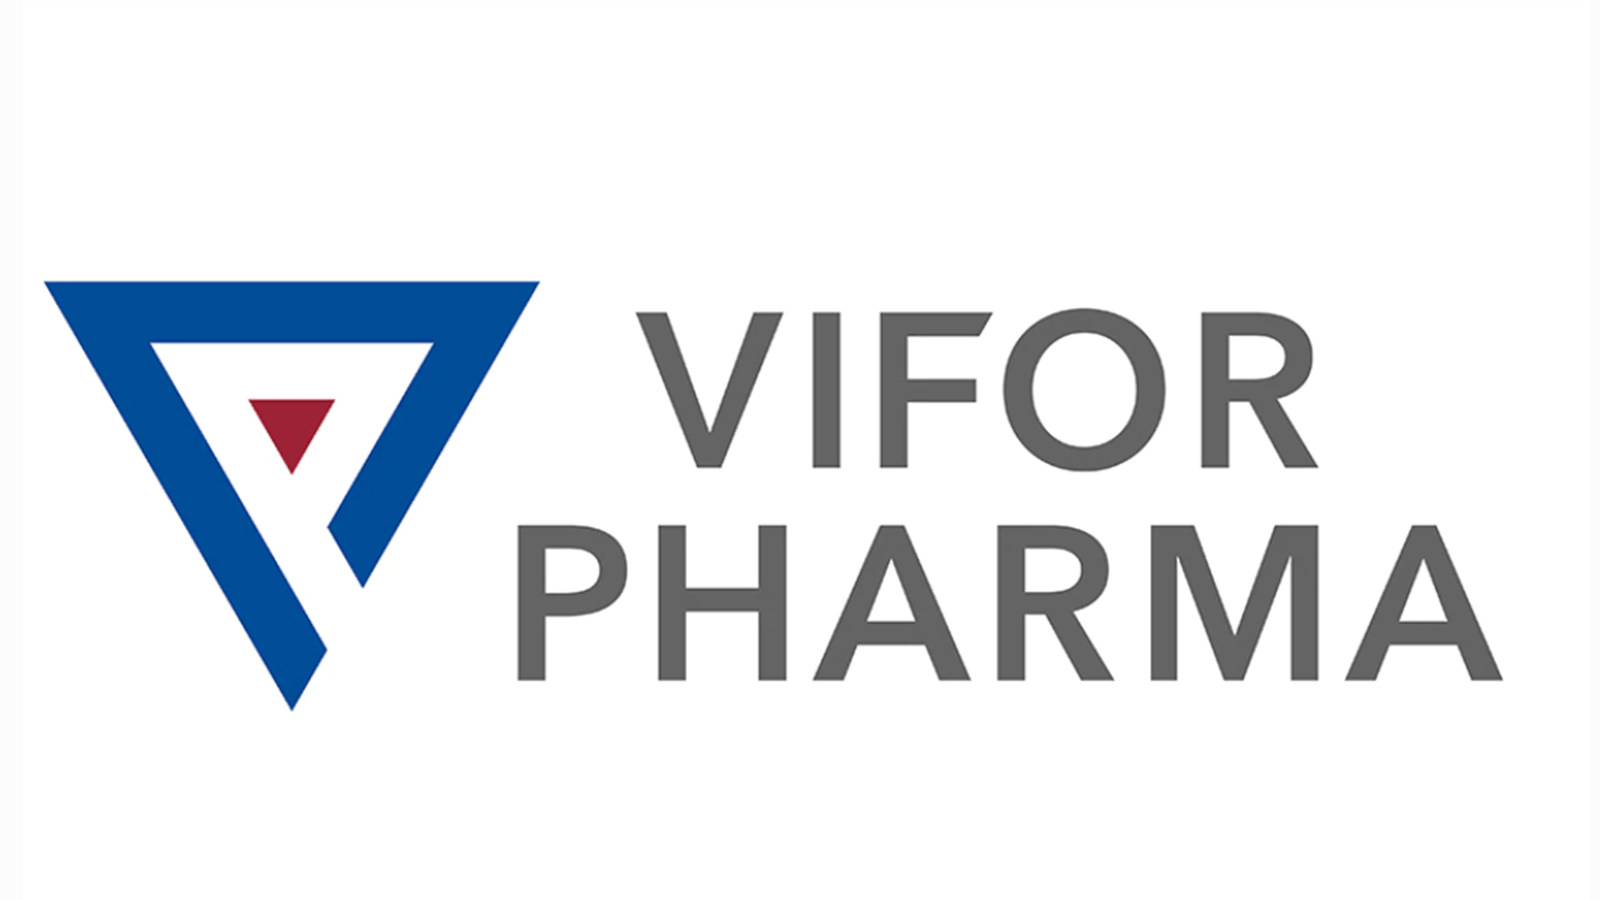 Vifor Pharma logo with blue inverted triangle